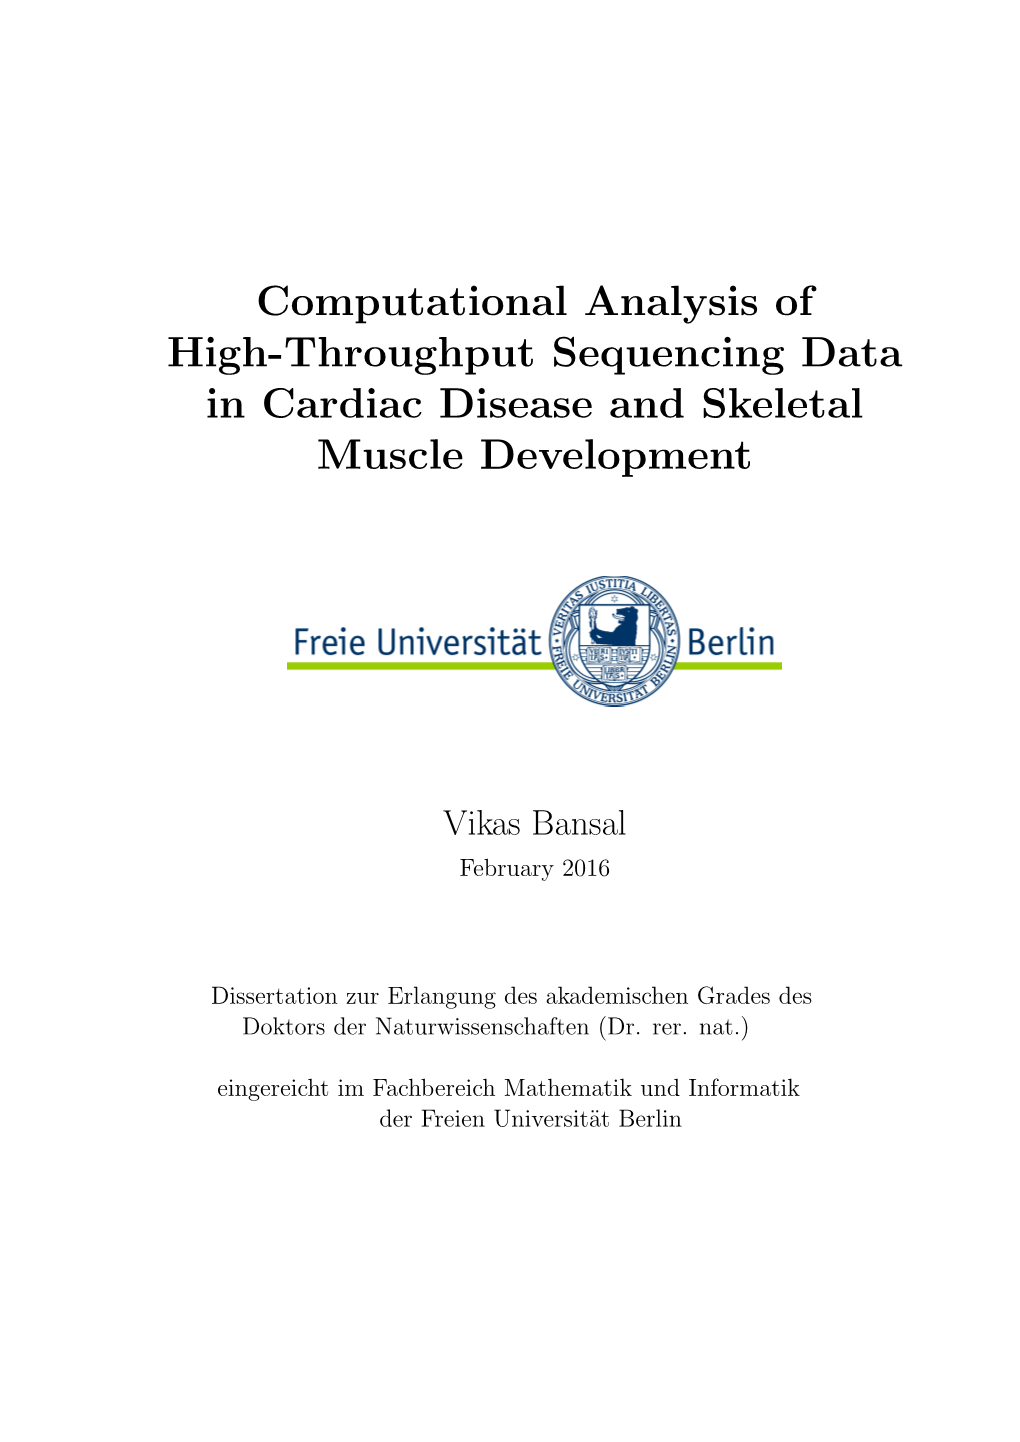 Computational Analysis of High-Throughput Sequencing Data in Cardiac Disease and Skeletal Muscle Development